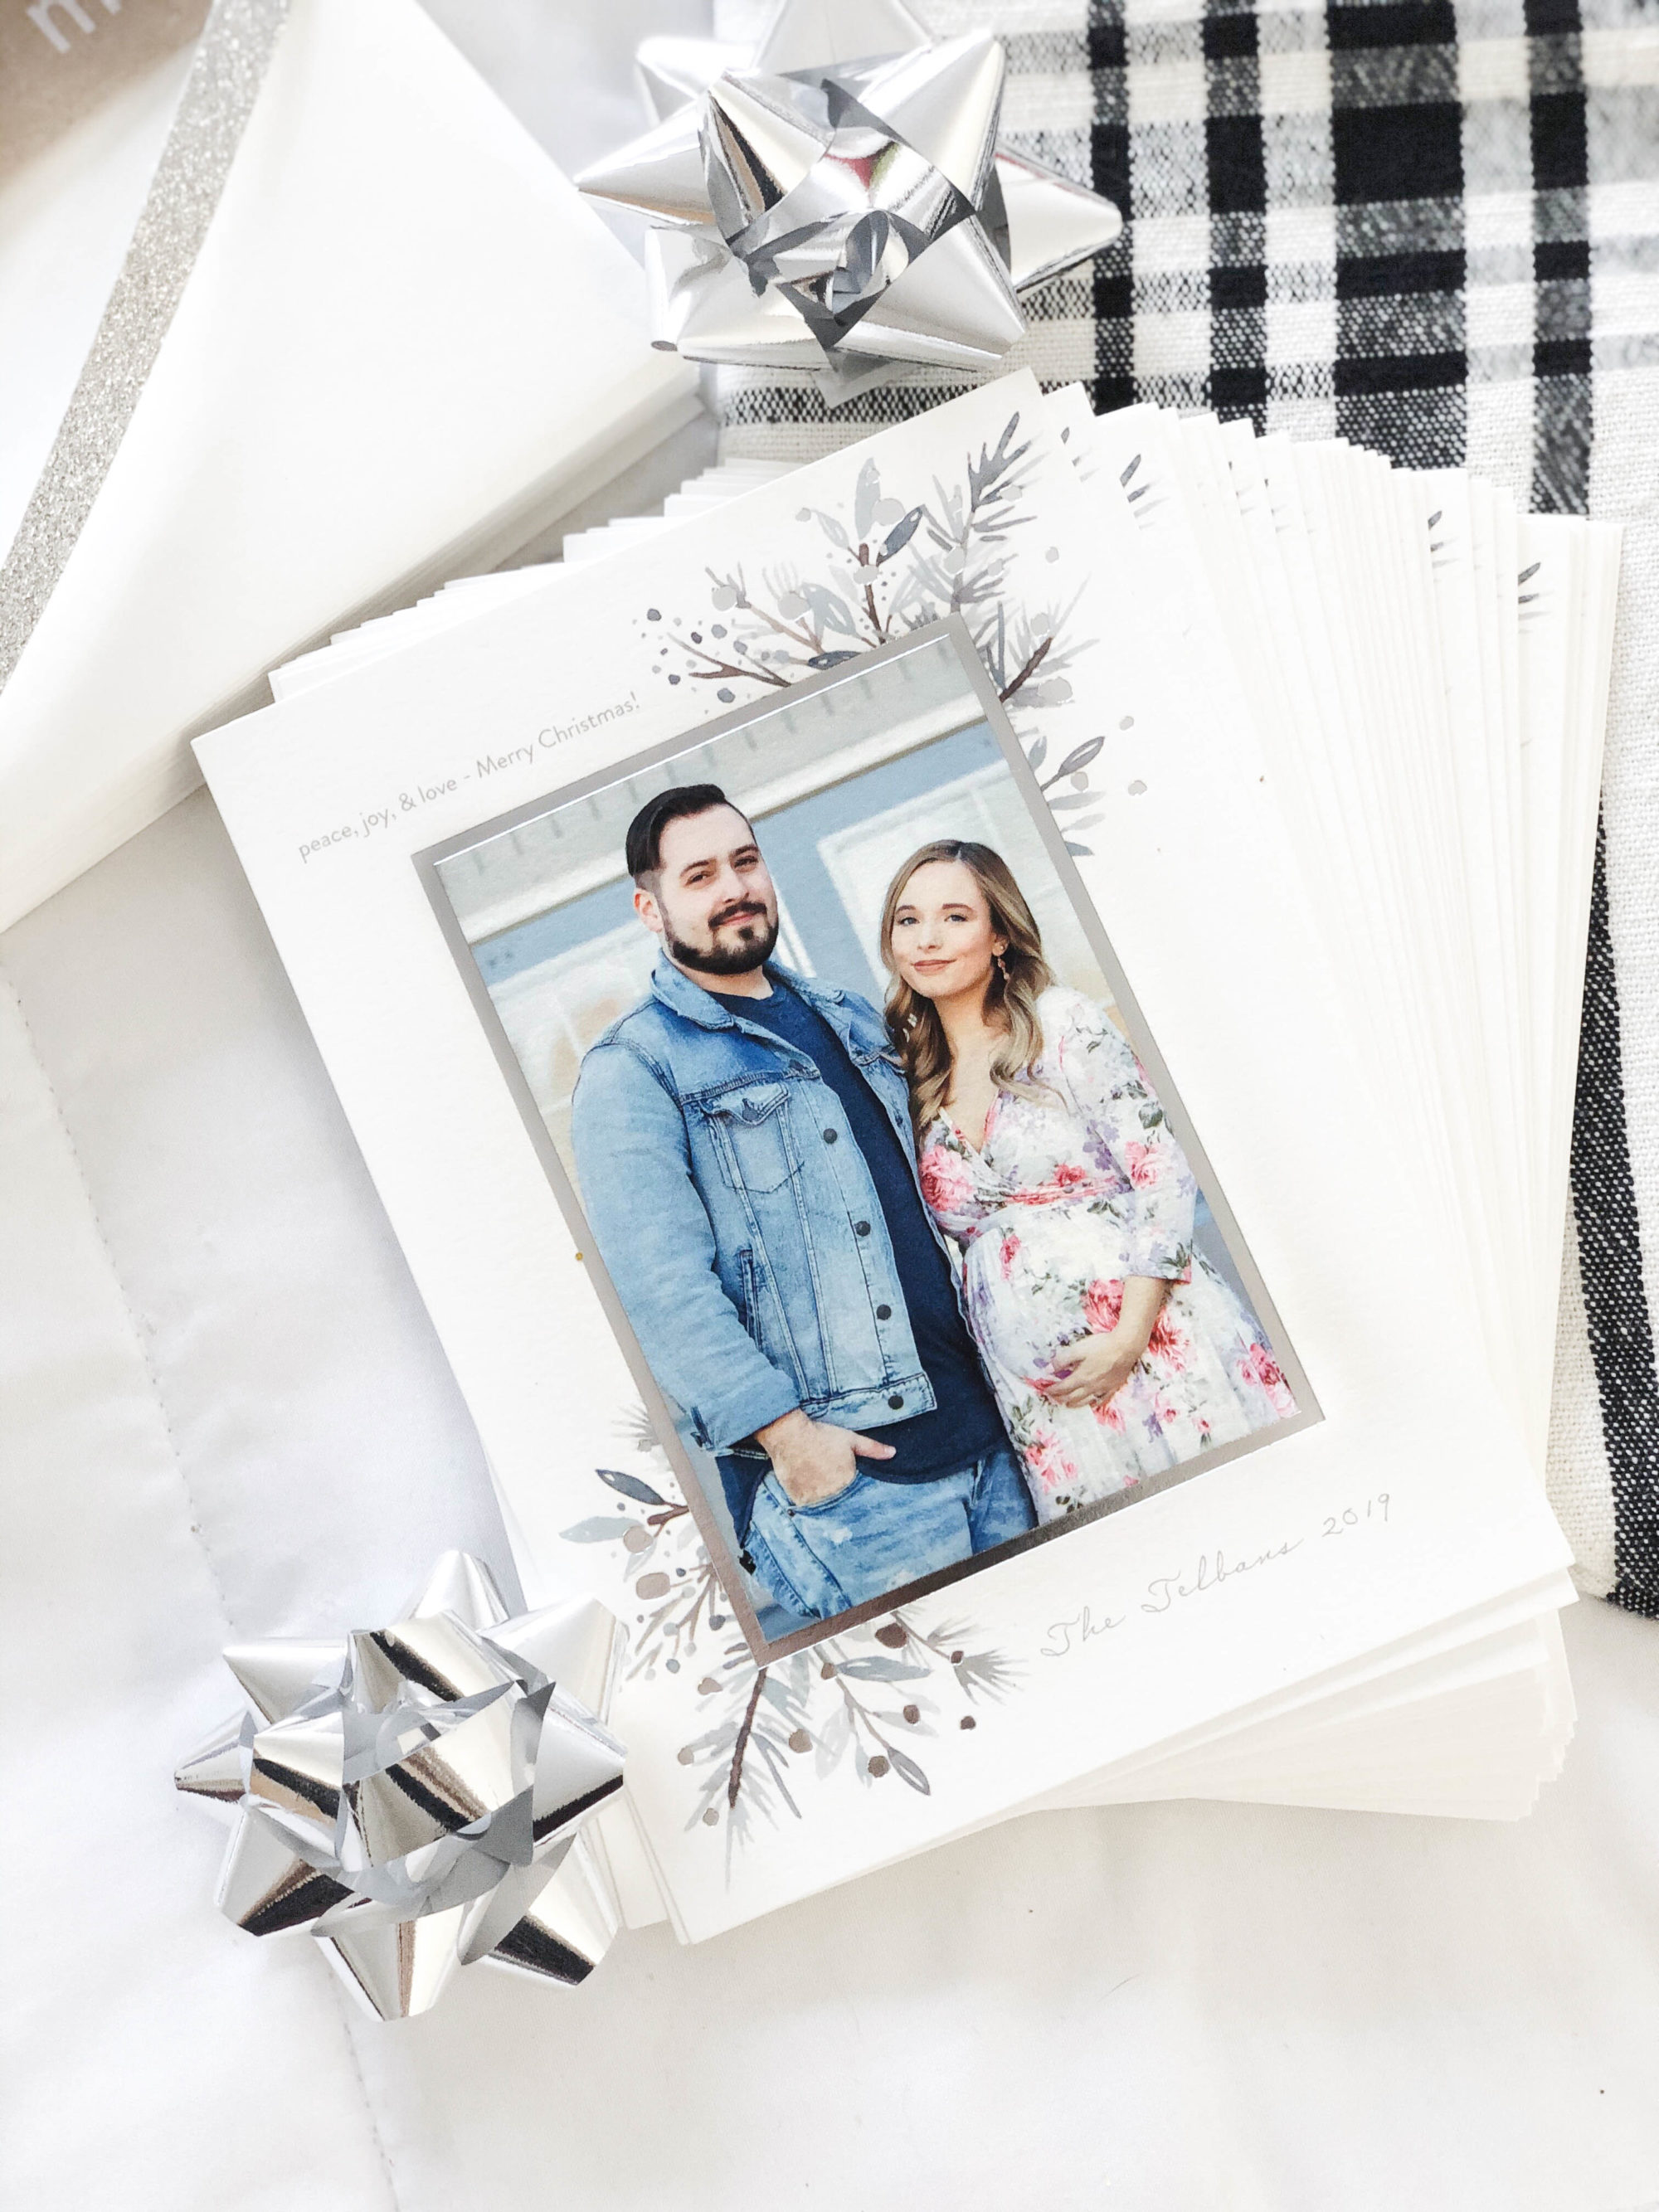 Christmas Cards from Minted 2019